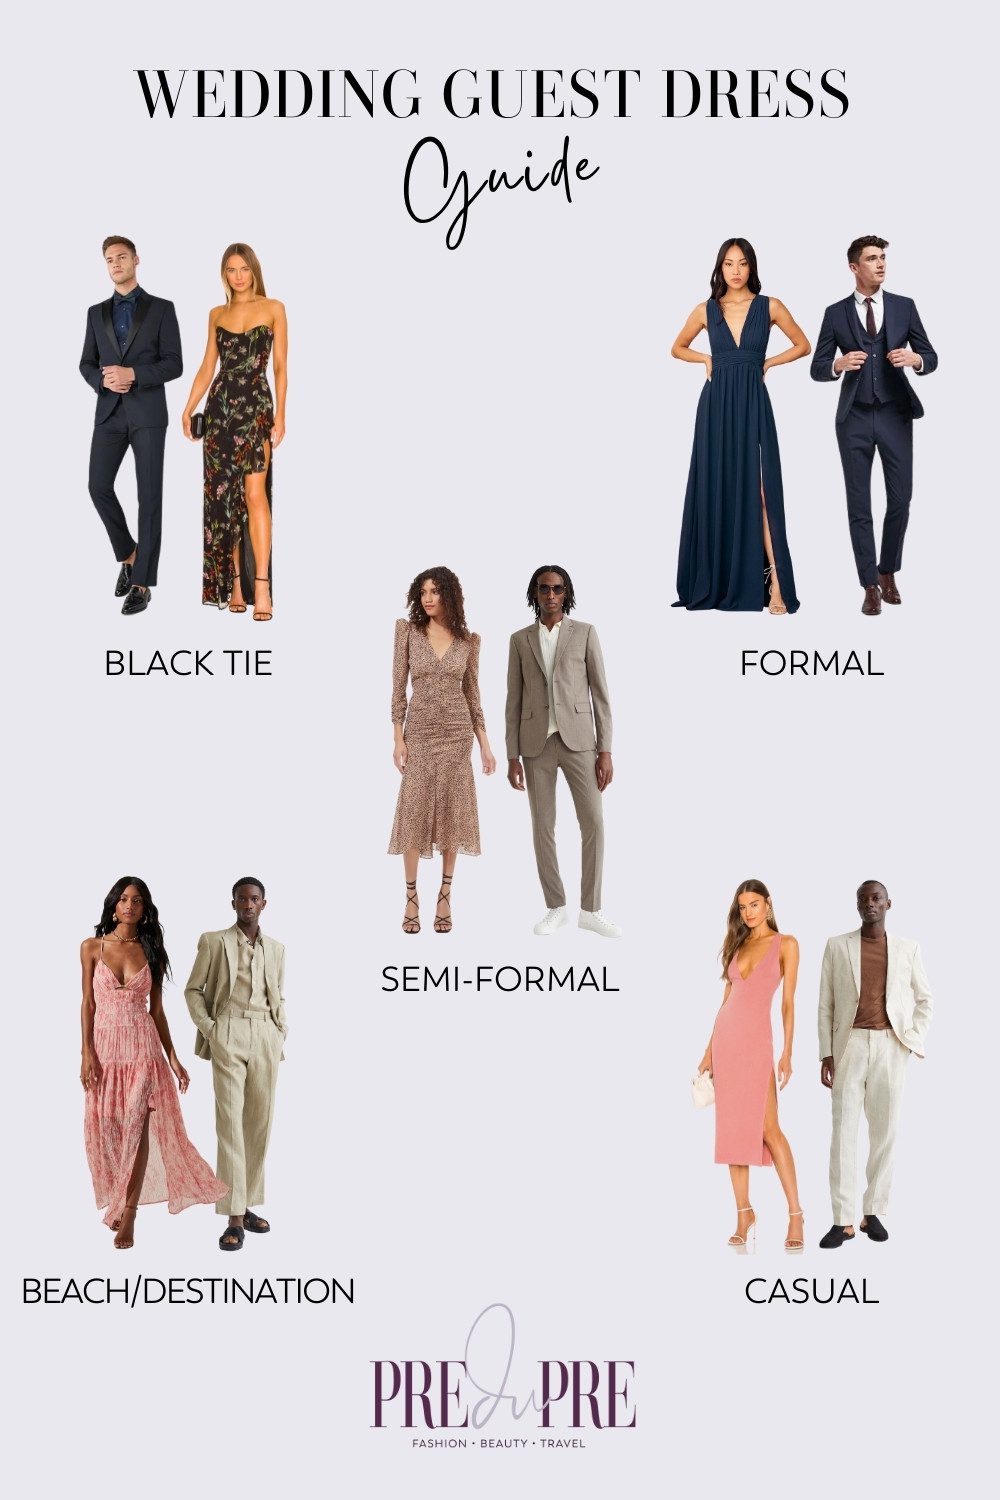 Collage of male and female outfits on what to wear to a wedding depending on the type. From clockwise: black tie, formal, semi-formal, casual, beach/destination.